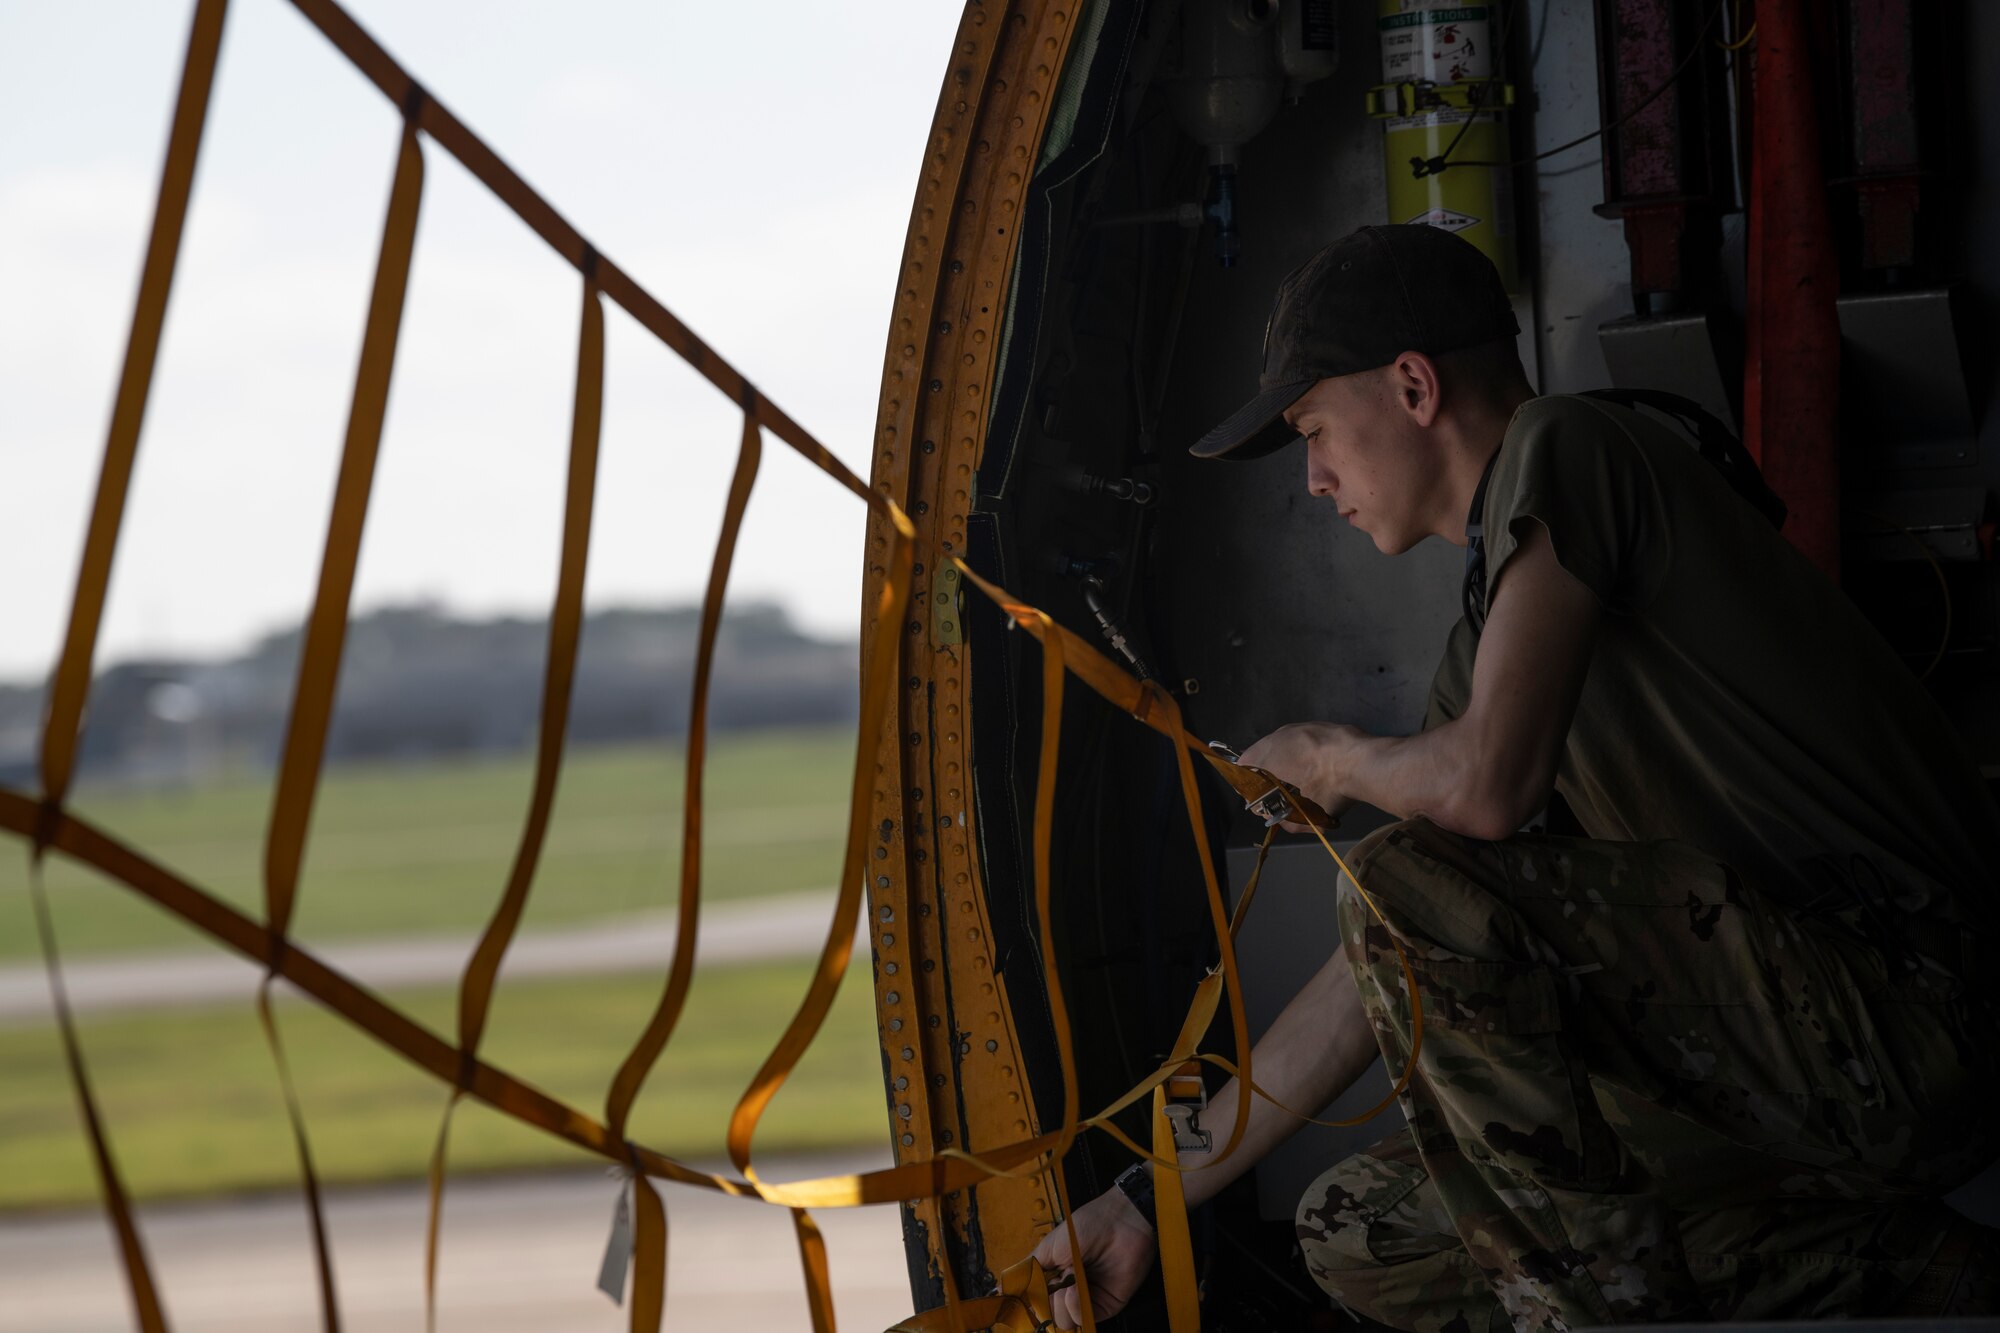 Airman 1st Class Ethan Parker, 909th Air Refueling Squadron boom operator, preps the aircraft for take-off in support of a joint training exercise over the Pacific Ocean, Oct. 24, 2022. Joint training strengthens partnerships and enhances capabilities, allowing the U.S. to maintain air supremacy and ensure a free and open Indo-Pacific. (U.S. Air Force photo by Senior Airman Jessi Roth)